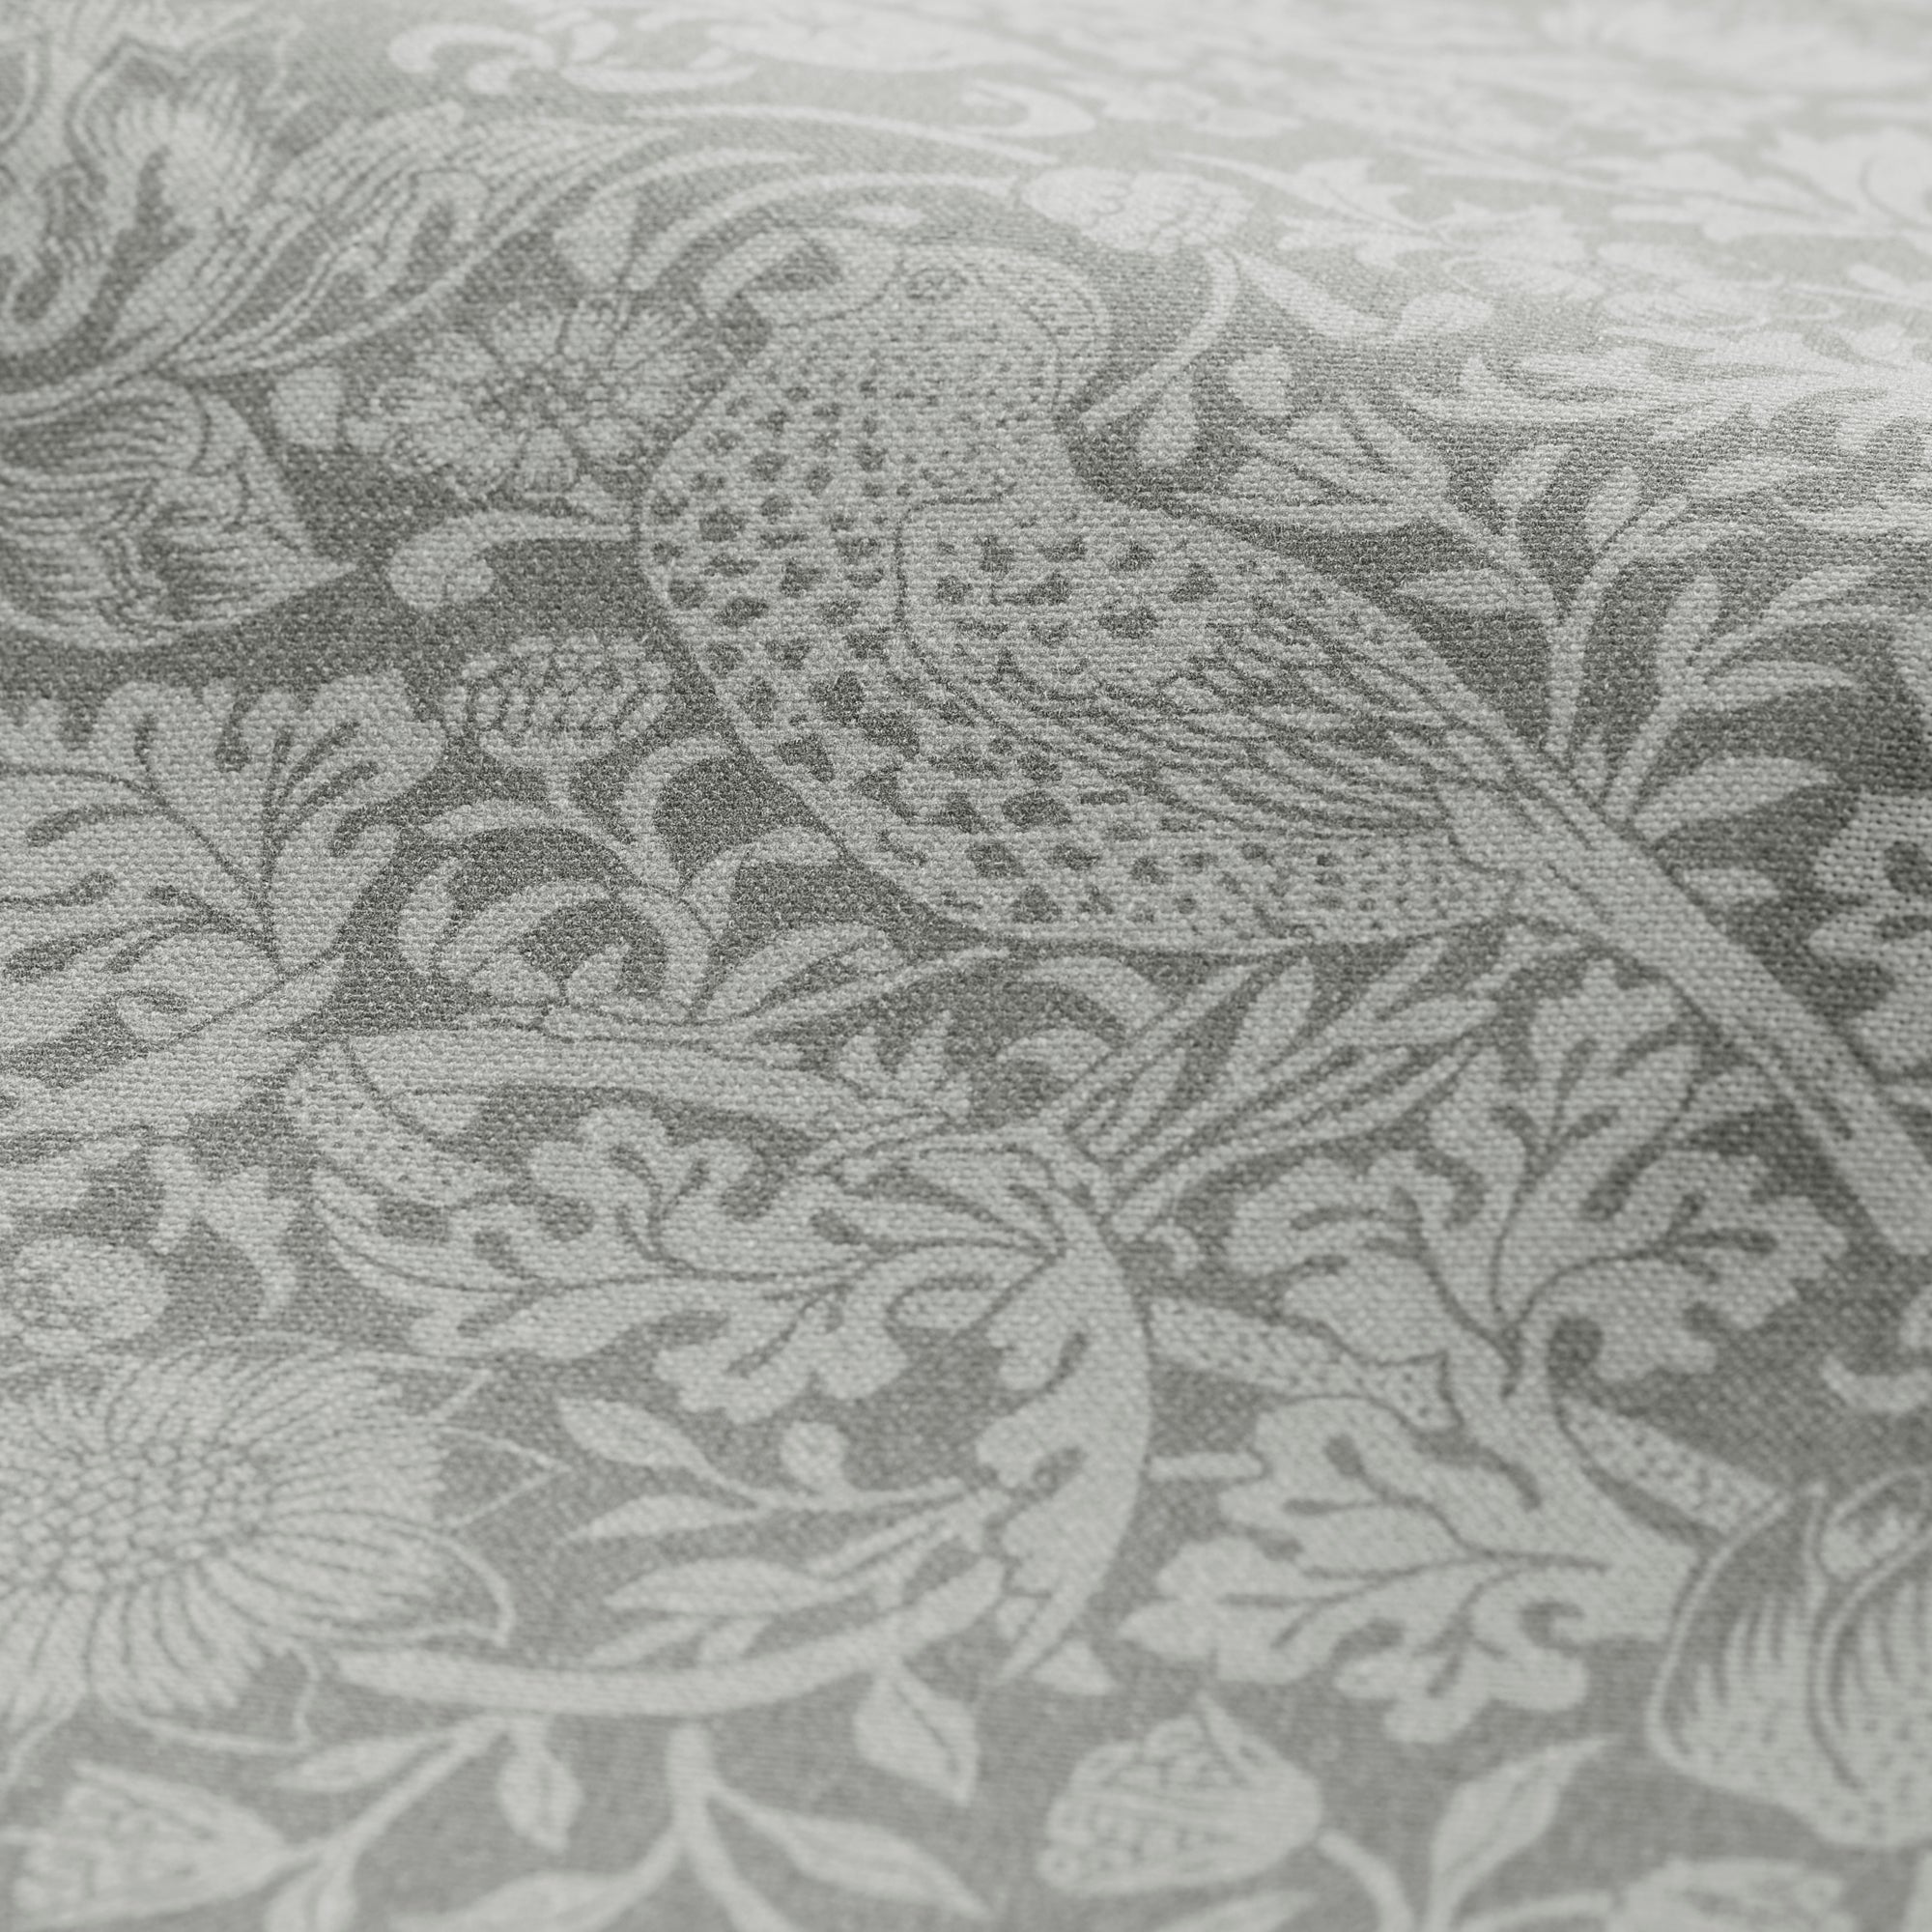 William Morris At Home Strawberry Thief Tonal Made To Measure Roman Blind Strawberry Thief Tonal Charcoal